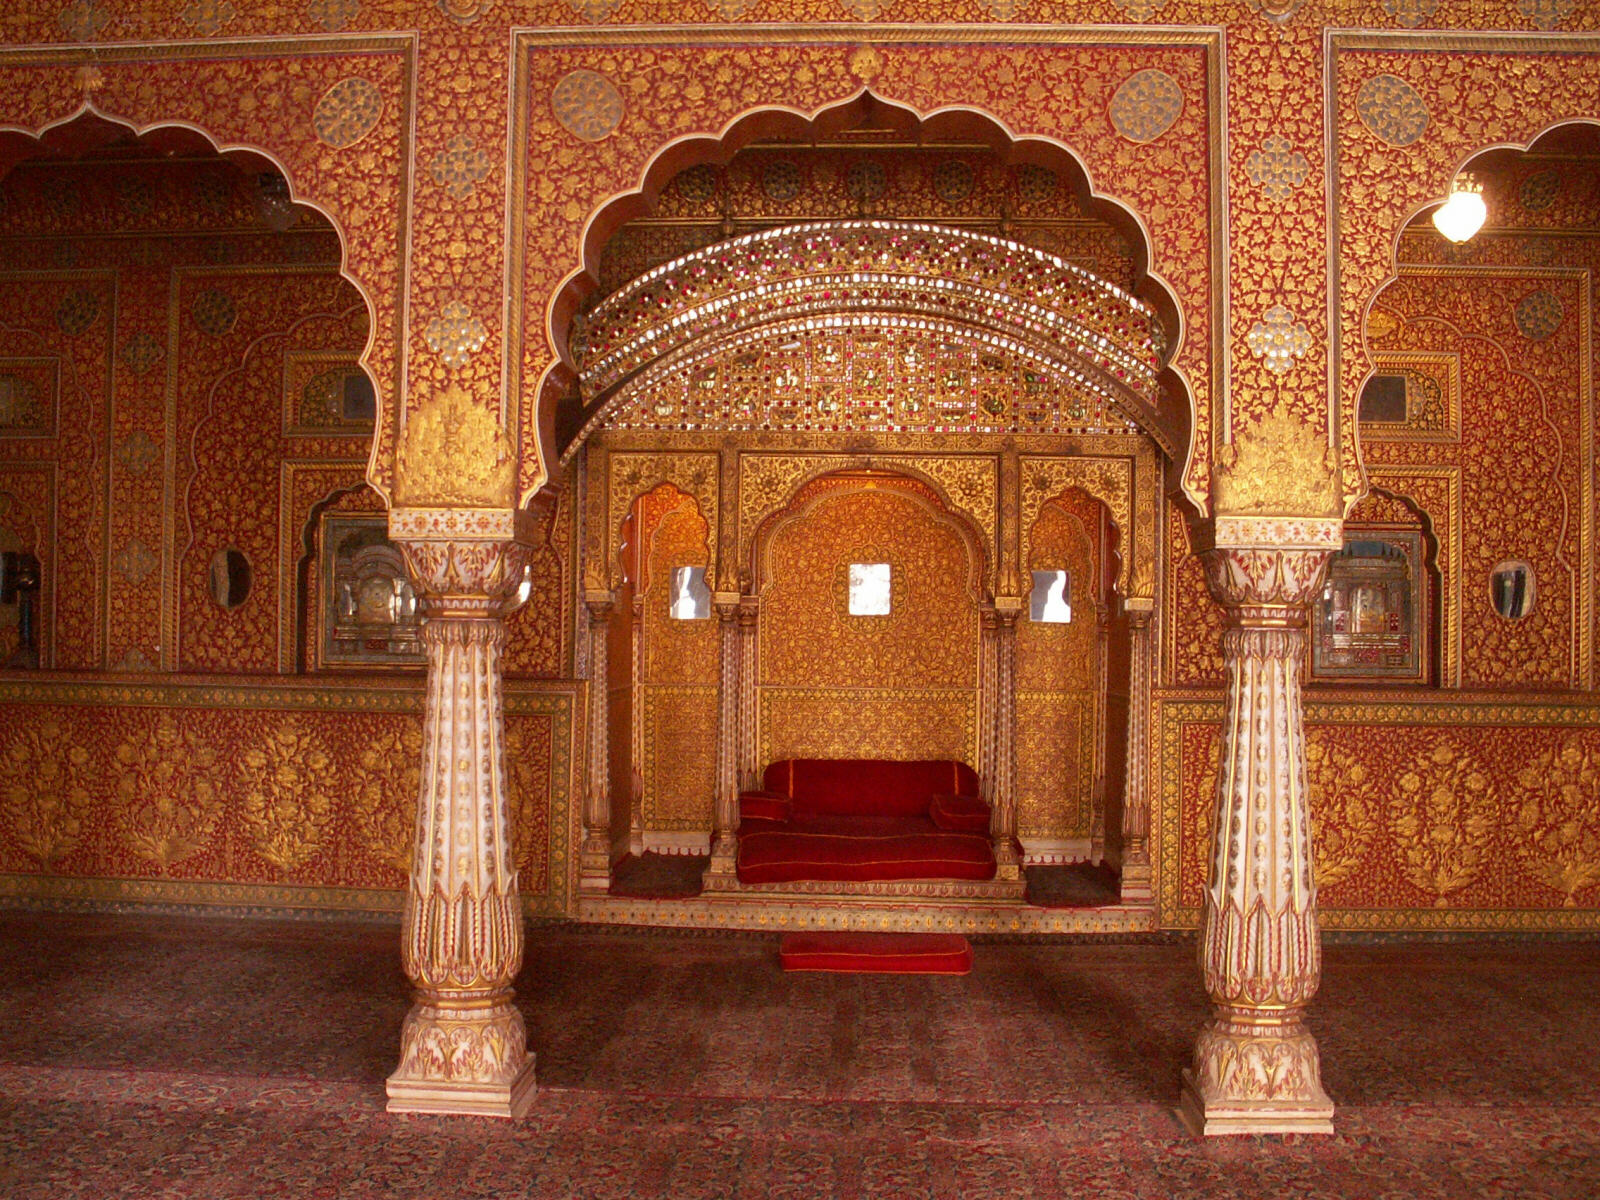 A room inside a palace in the fort at Bikaner, Rajasthan